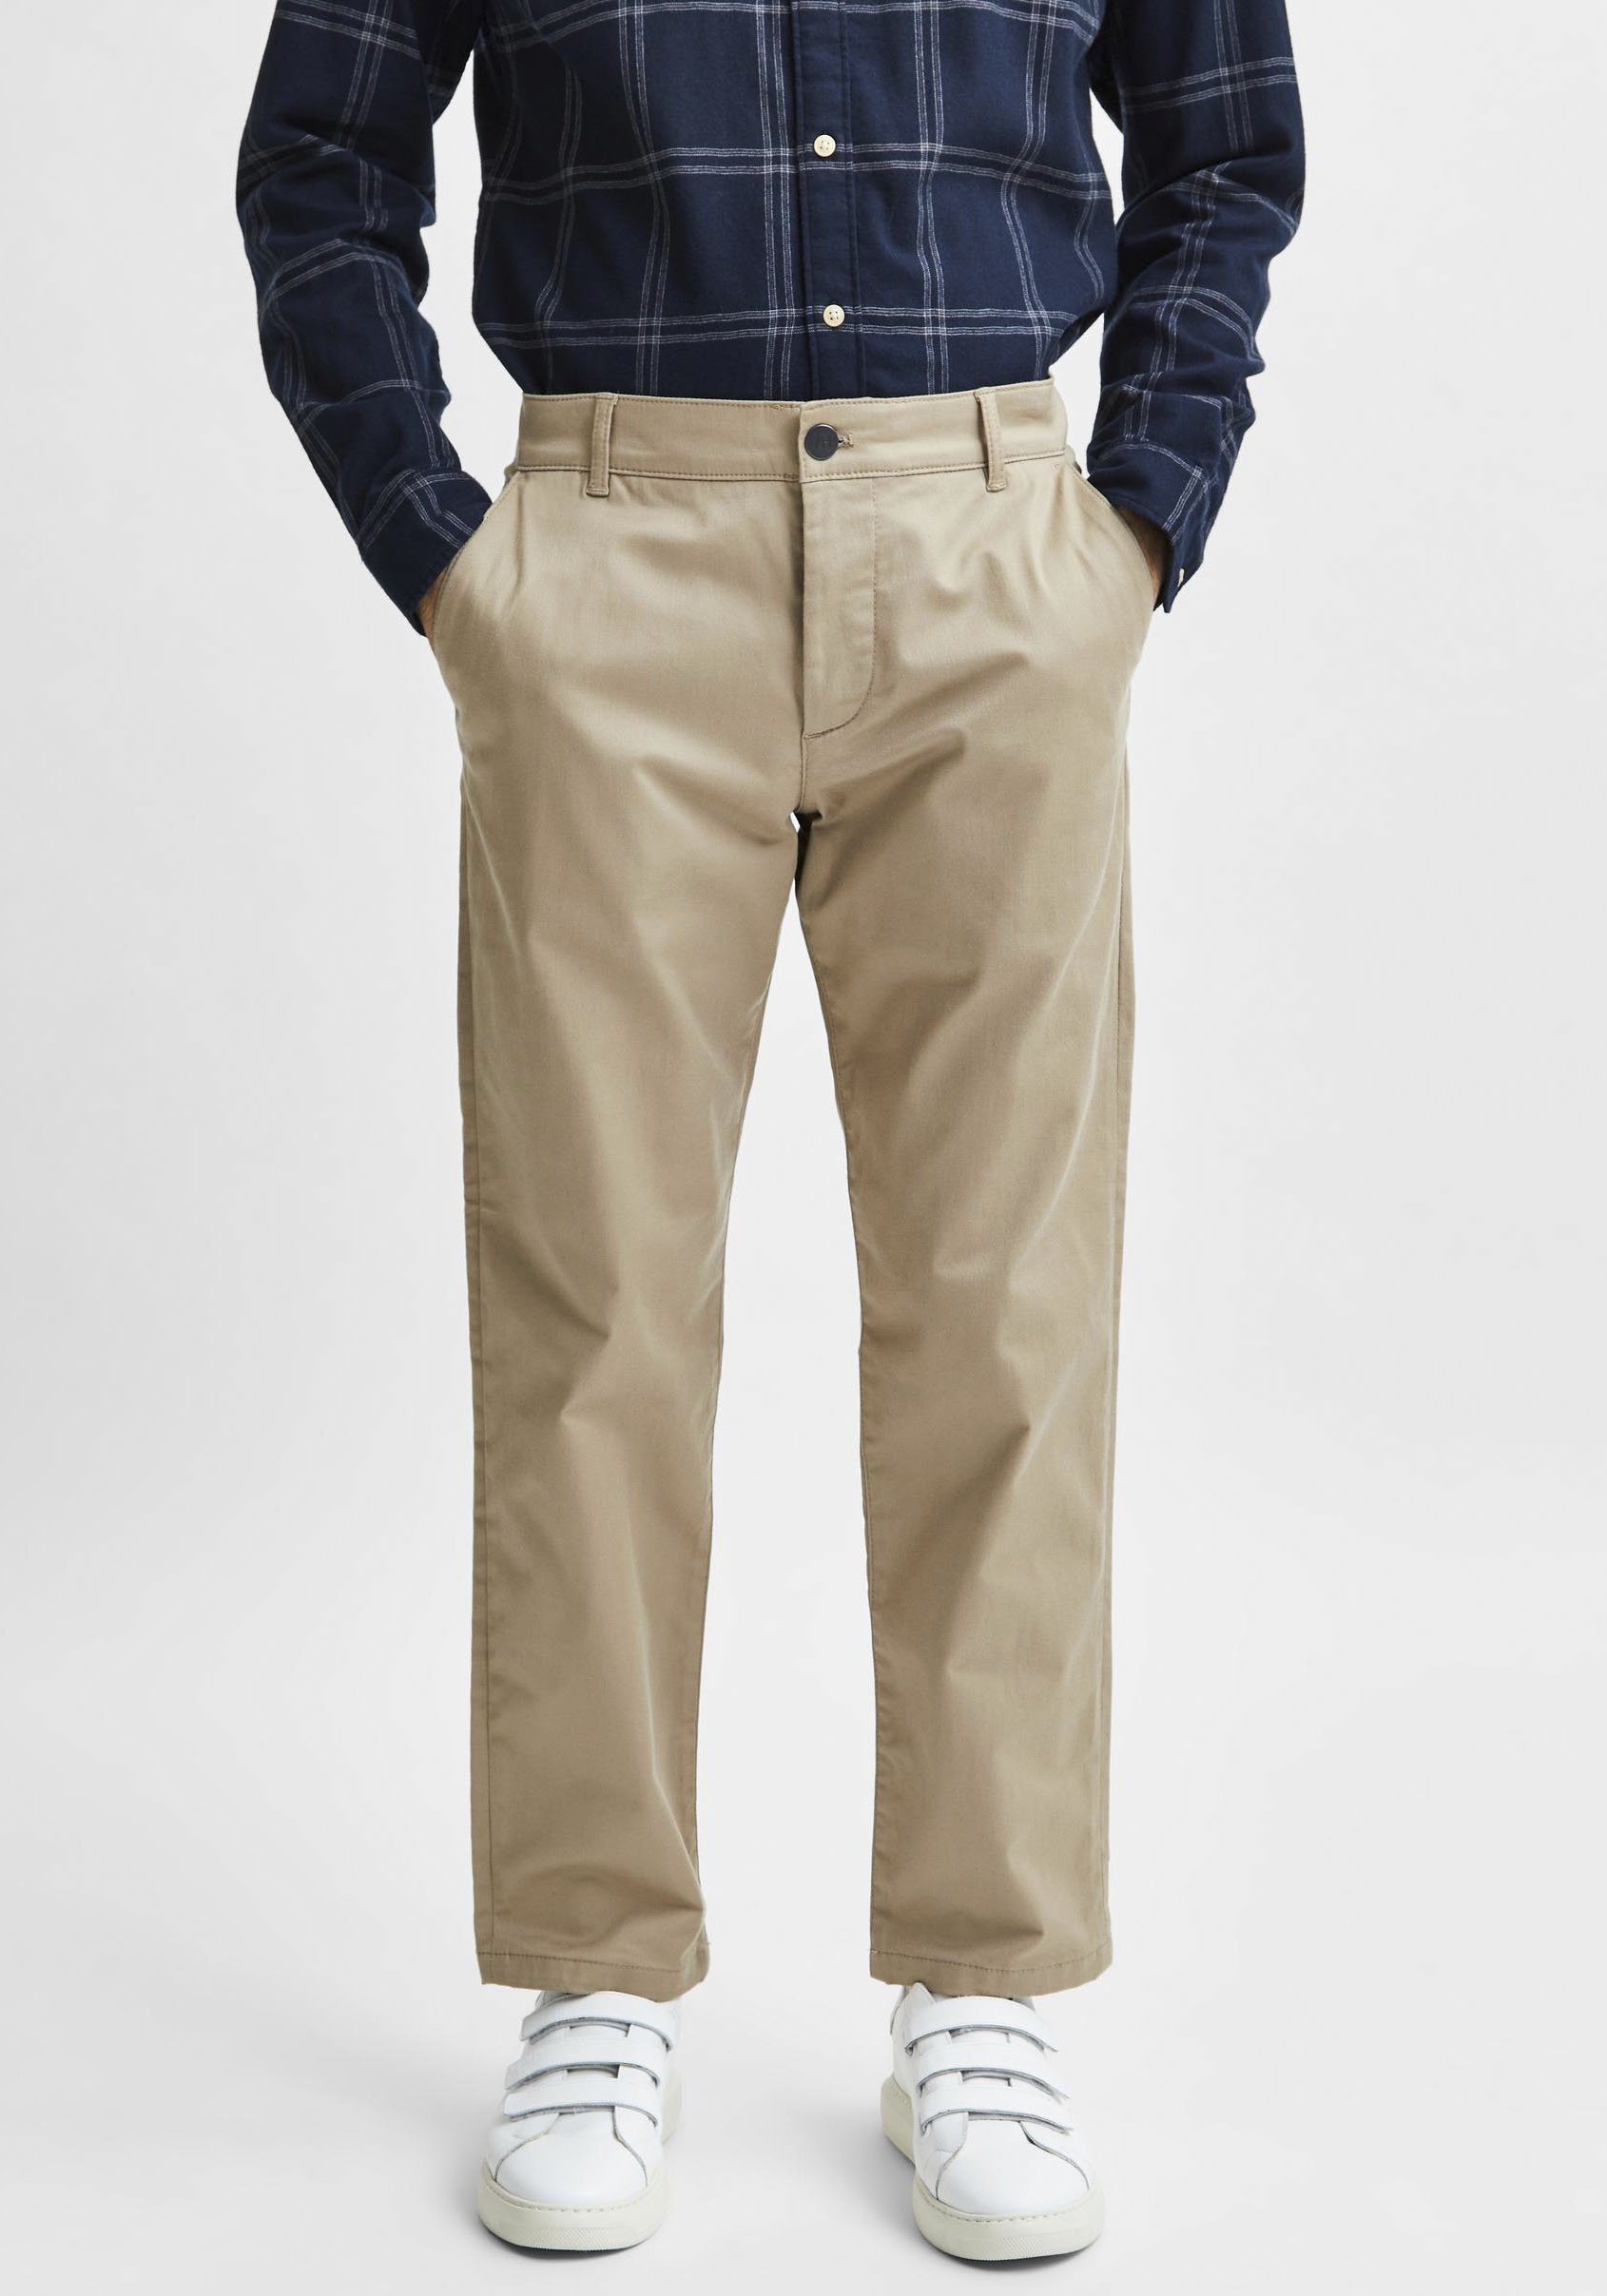 SELECTED HOMME Chinohose »SE Chino« SELECTED HOMME Chinchilla 31